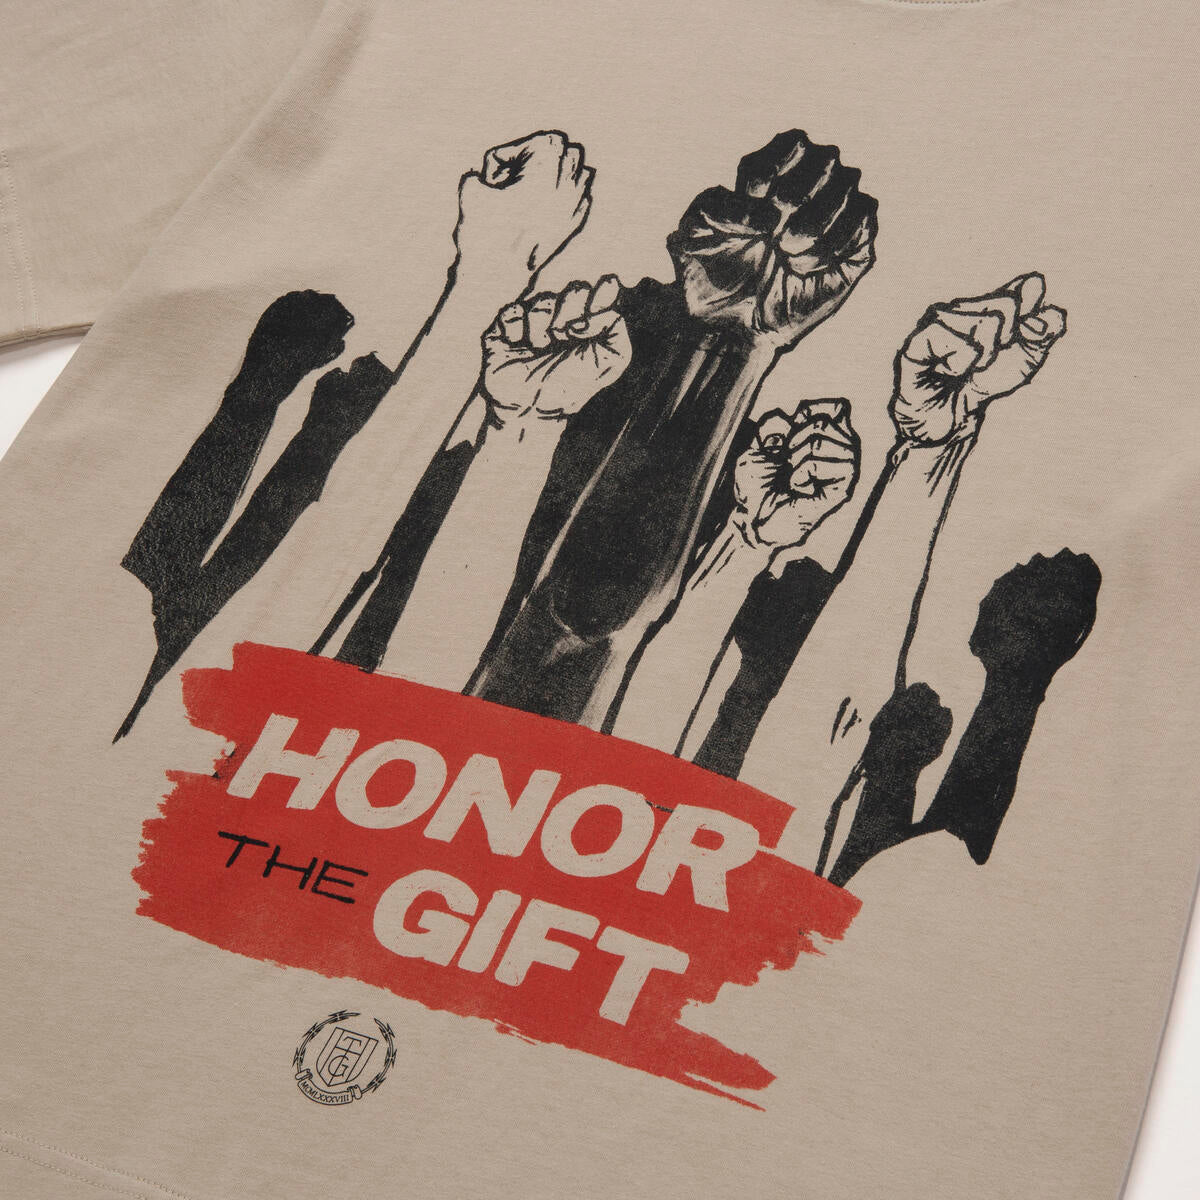 Honor The Gift A-springdignity Tee- TAN